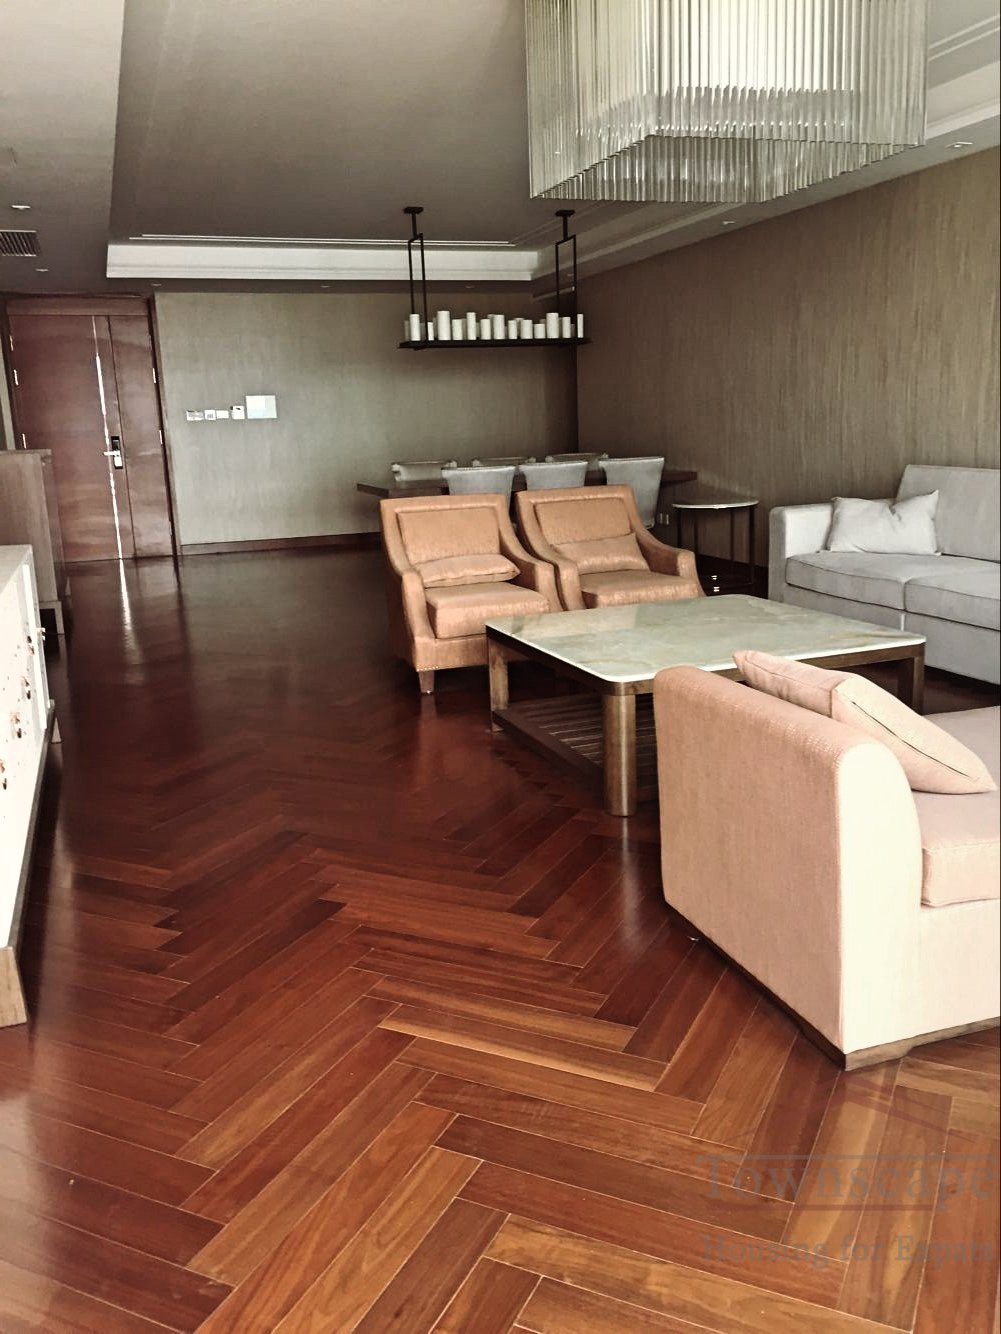 The Paragon 4BR apartment for rent 4BR Luxury Apartment for rent in The Paragon, Maoming Road